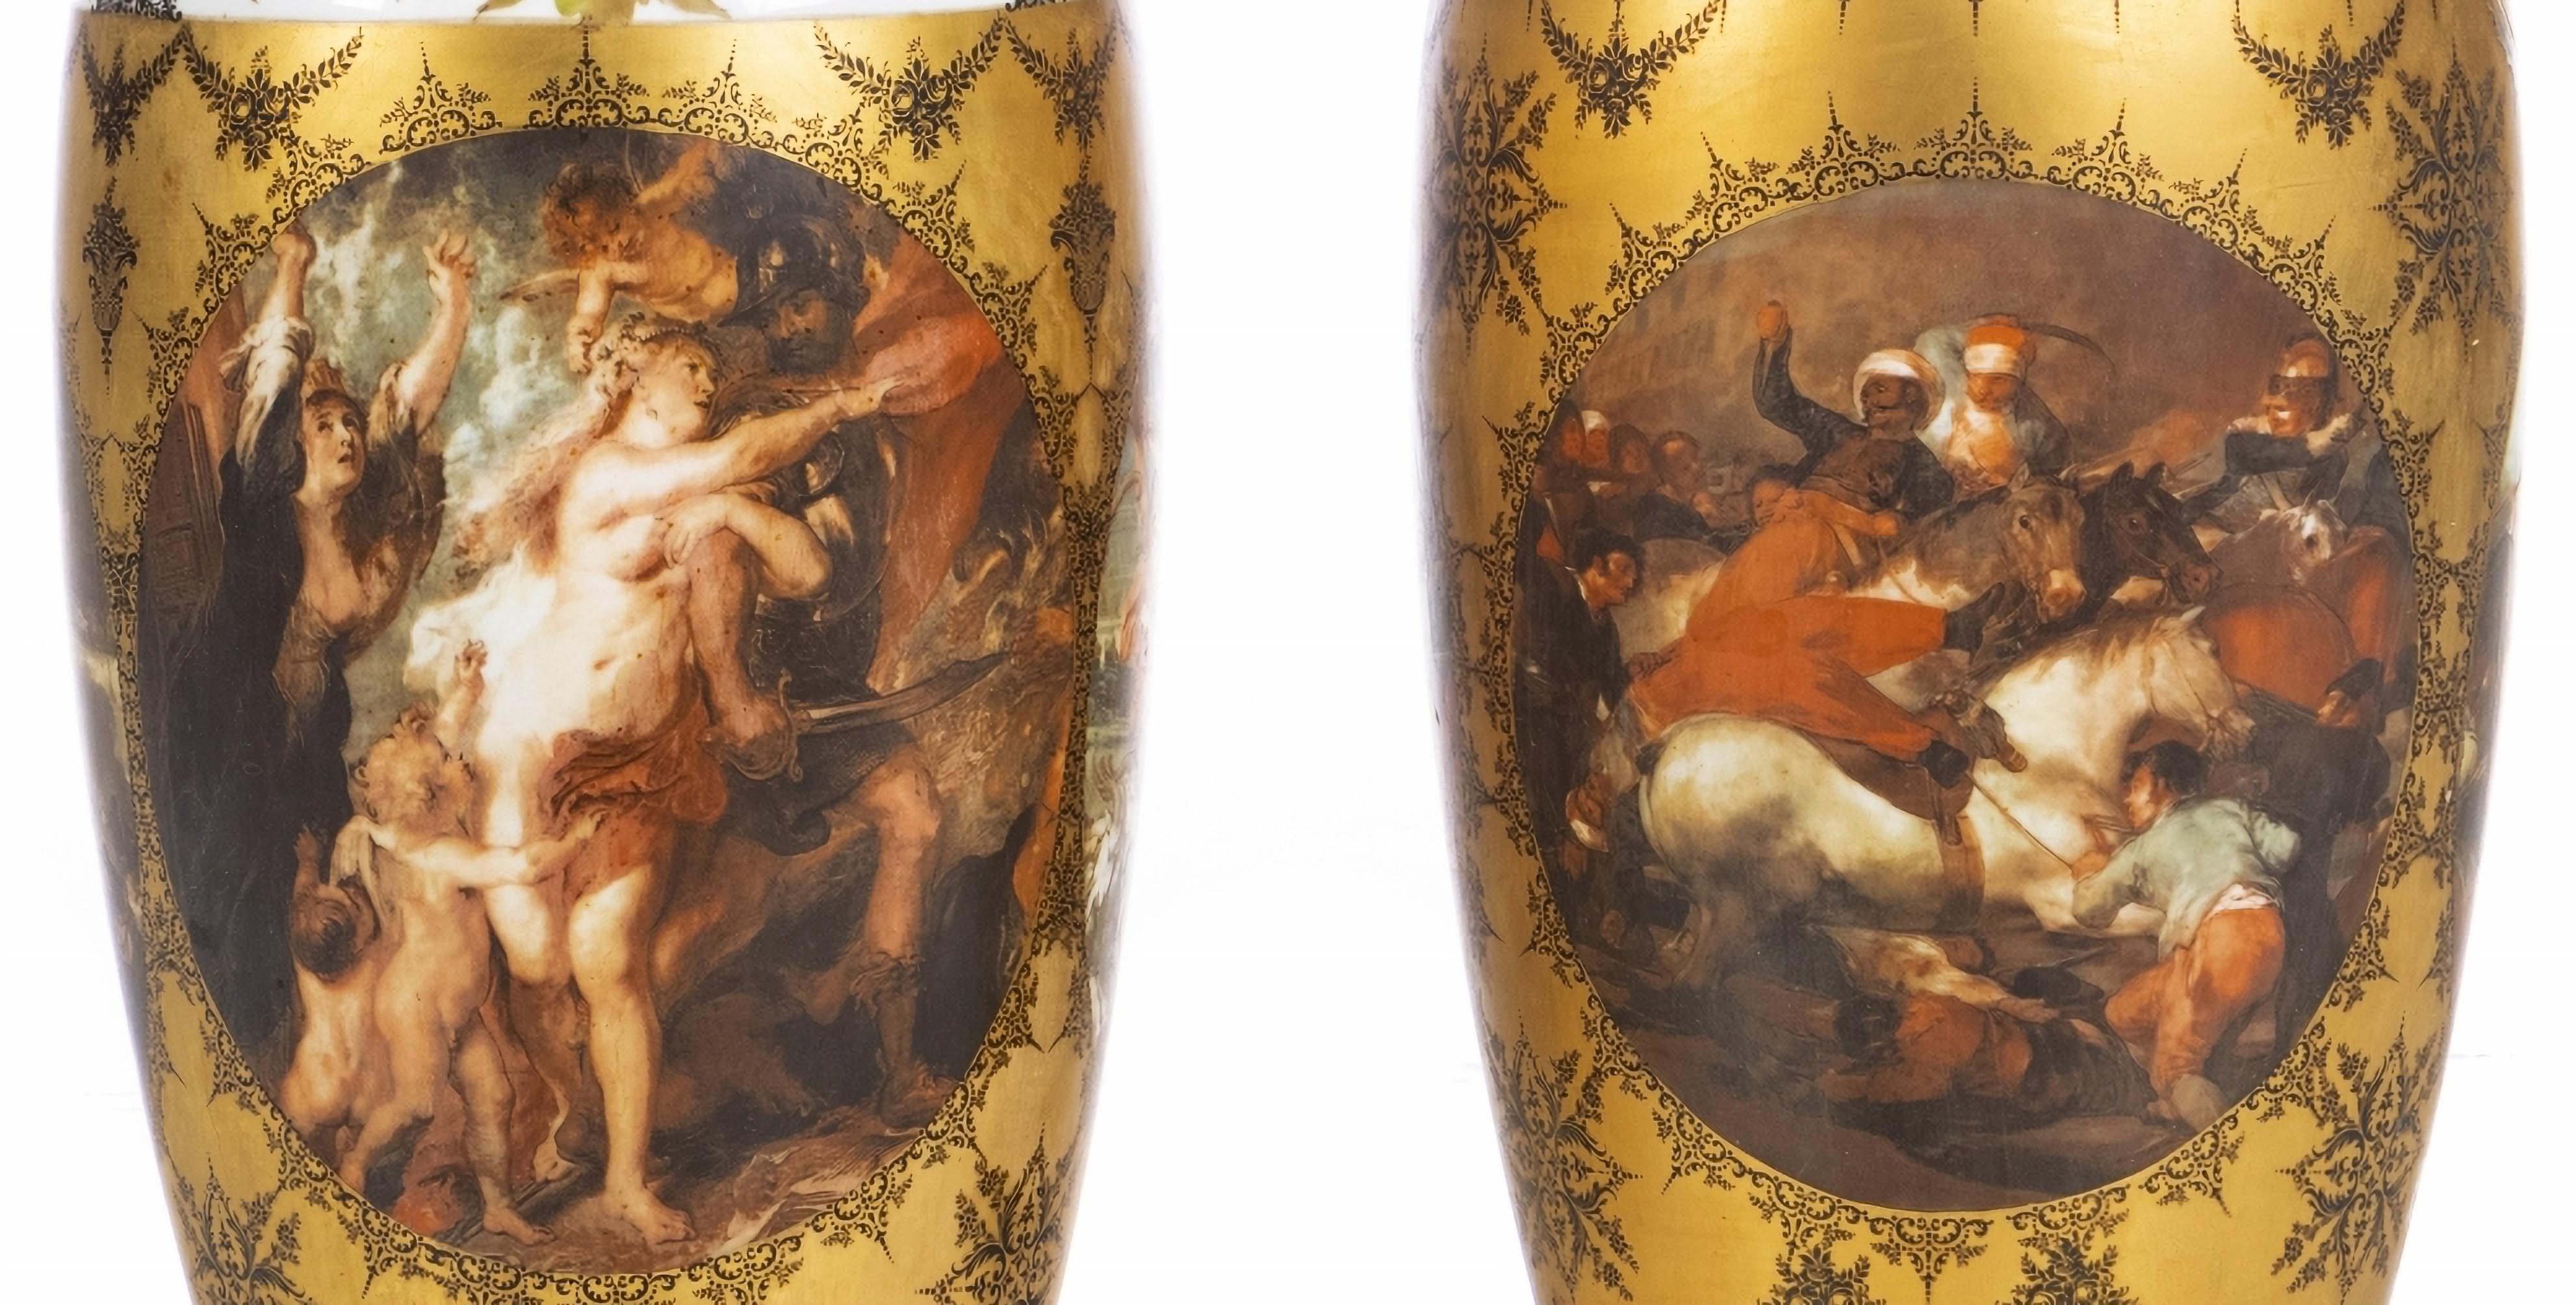 Important pair of Heinrich German Porcelain jars
20th century
polychrome and gilt decoration, with floral motifs and reserves with classical scenes.
Dim.: Height: 58 cm
good condition.